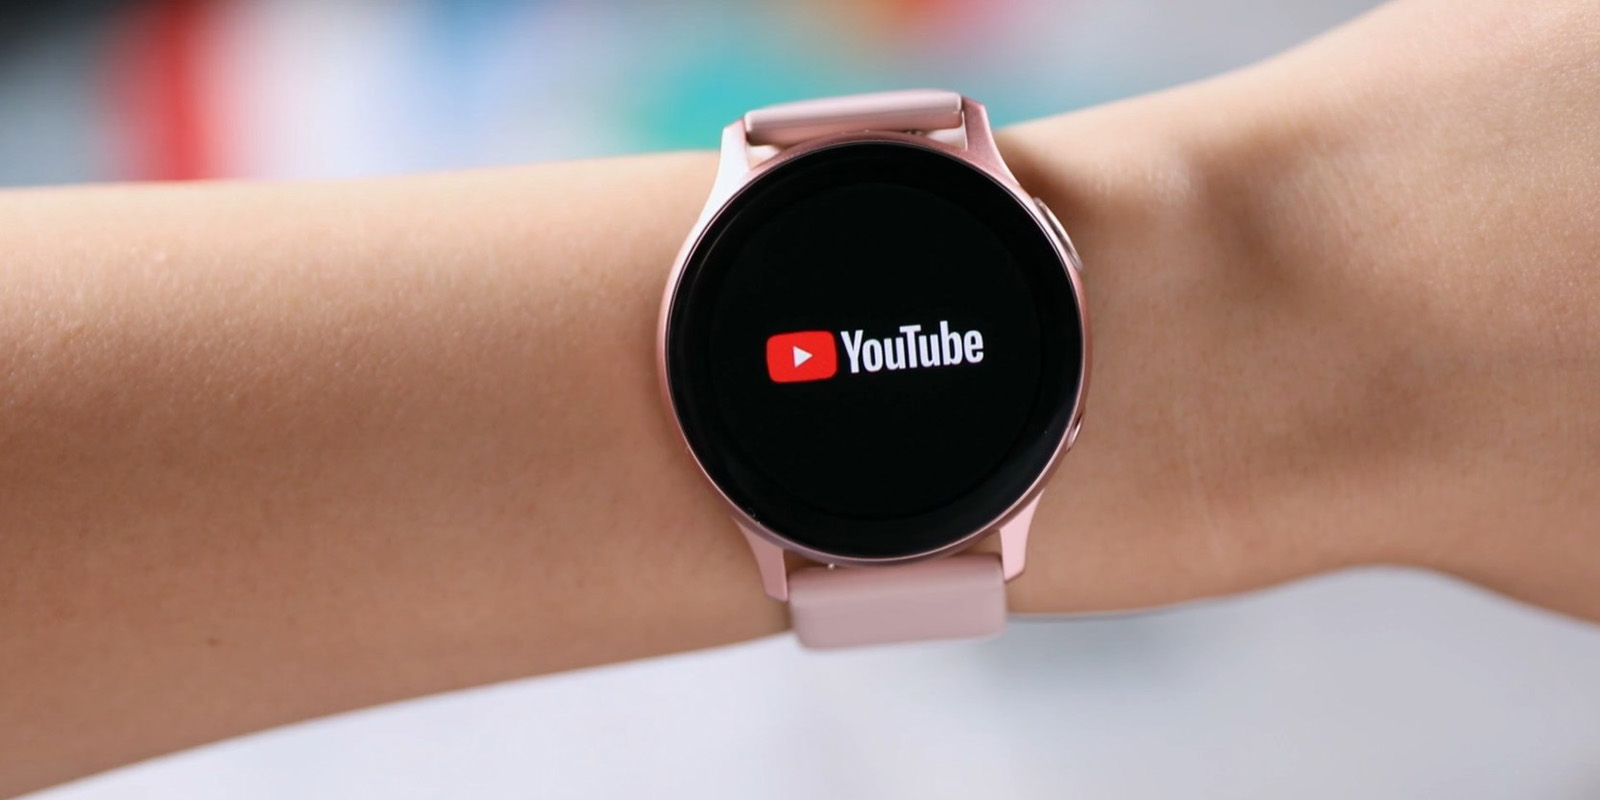 Samsung debuts a YouTube app for its 